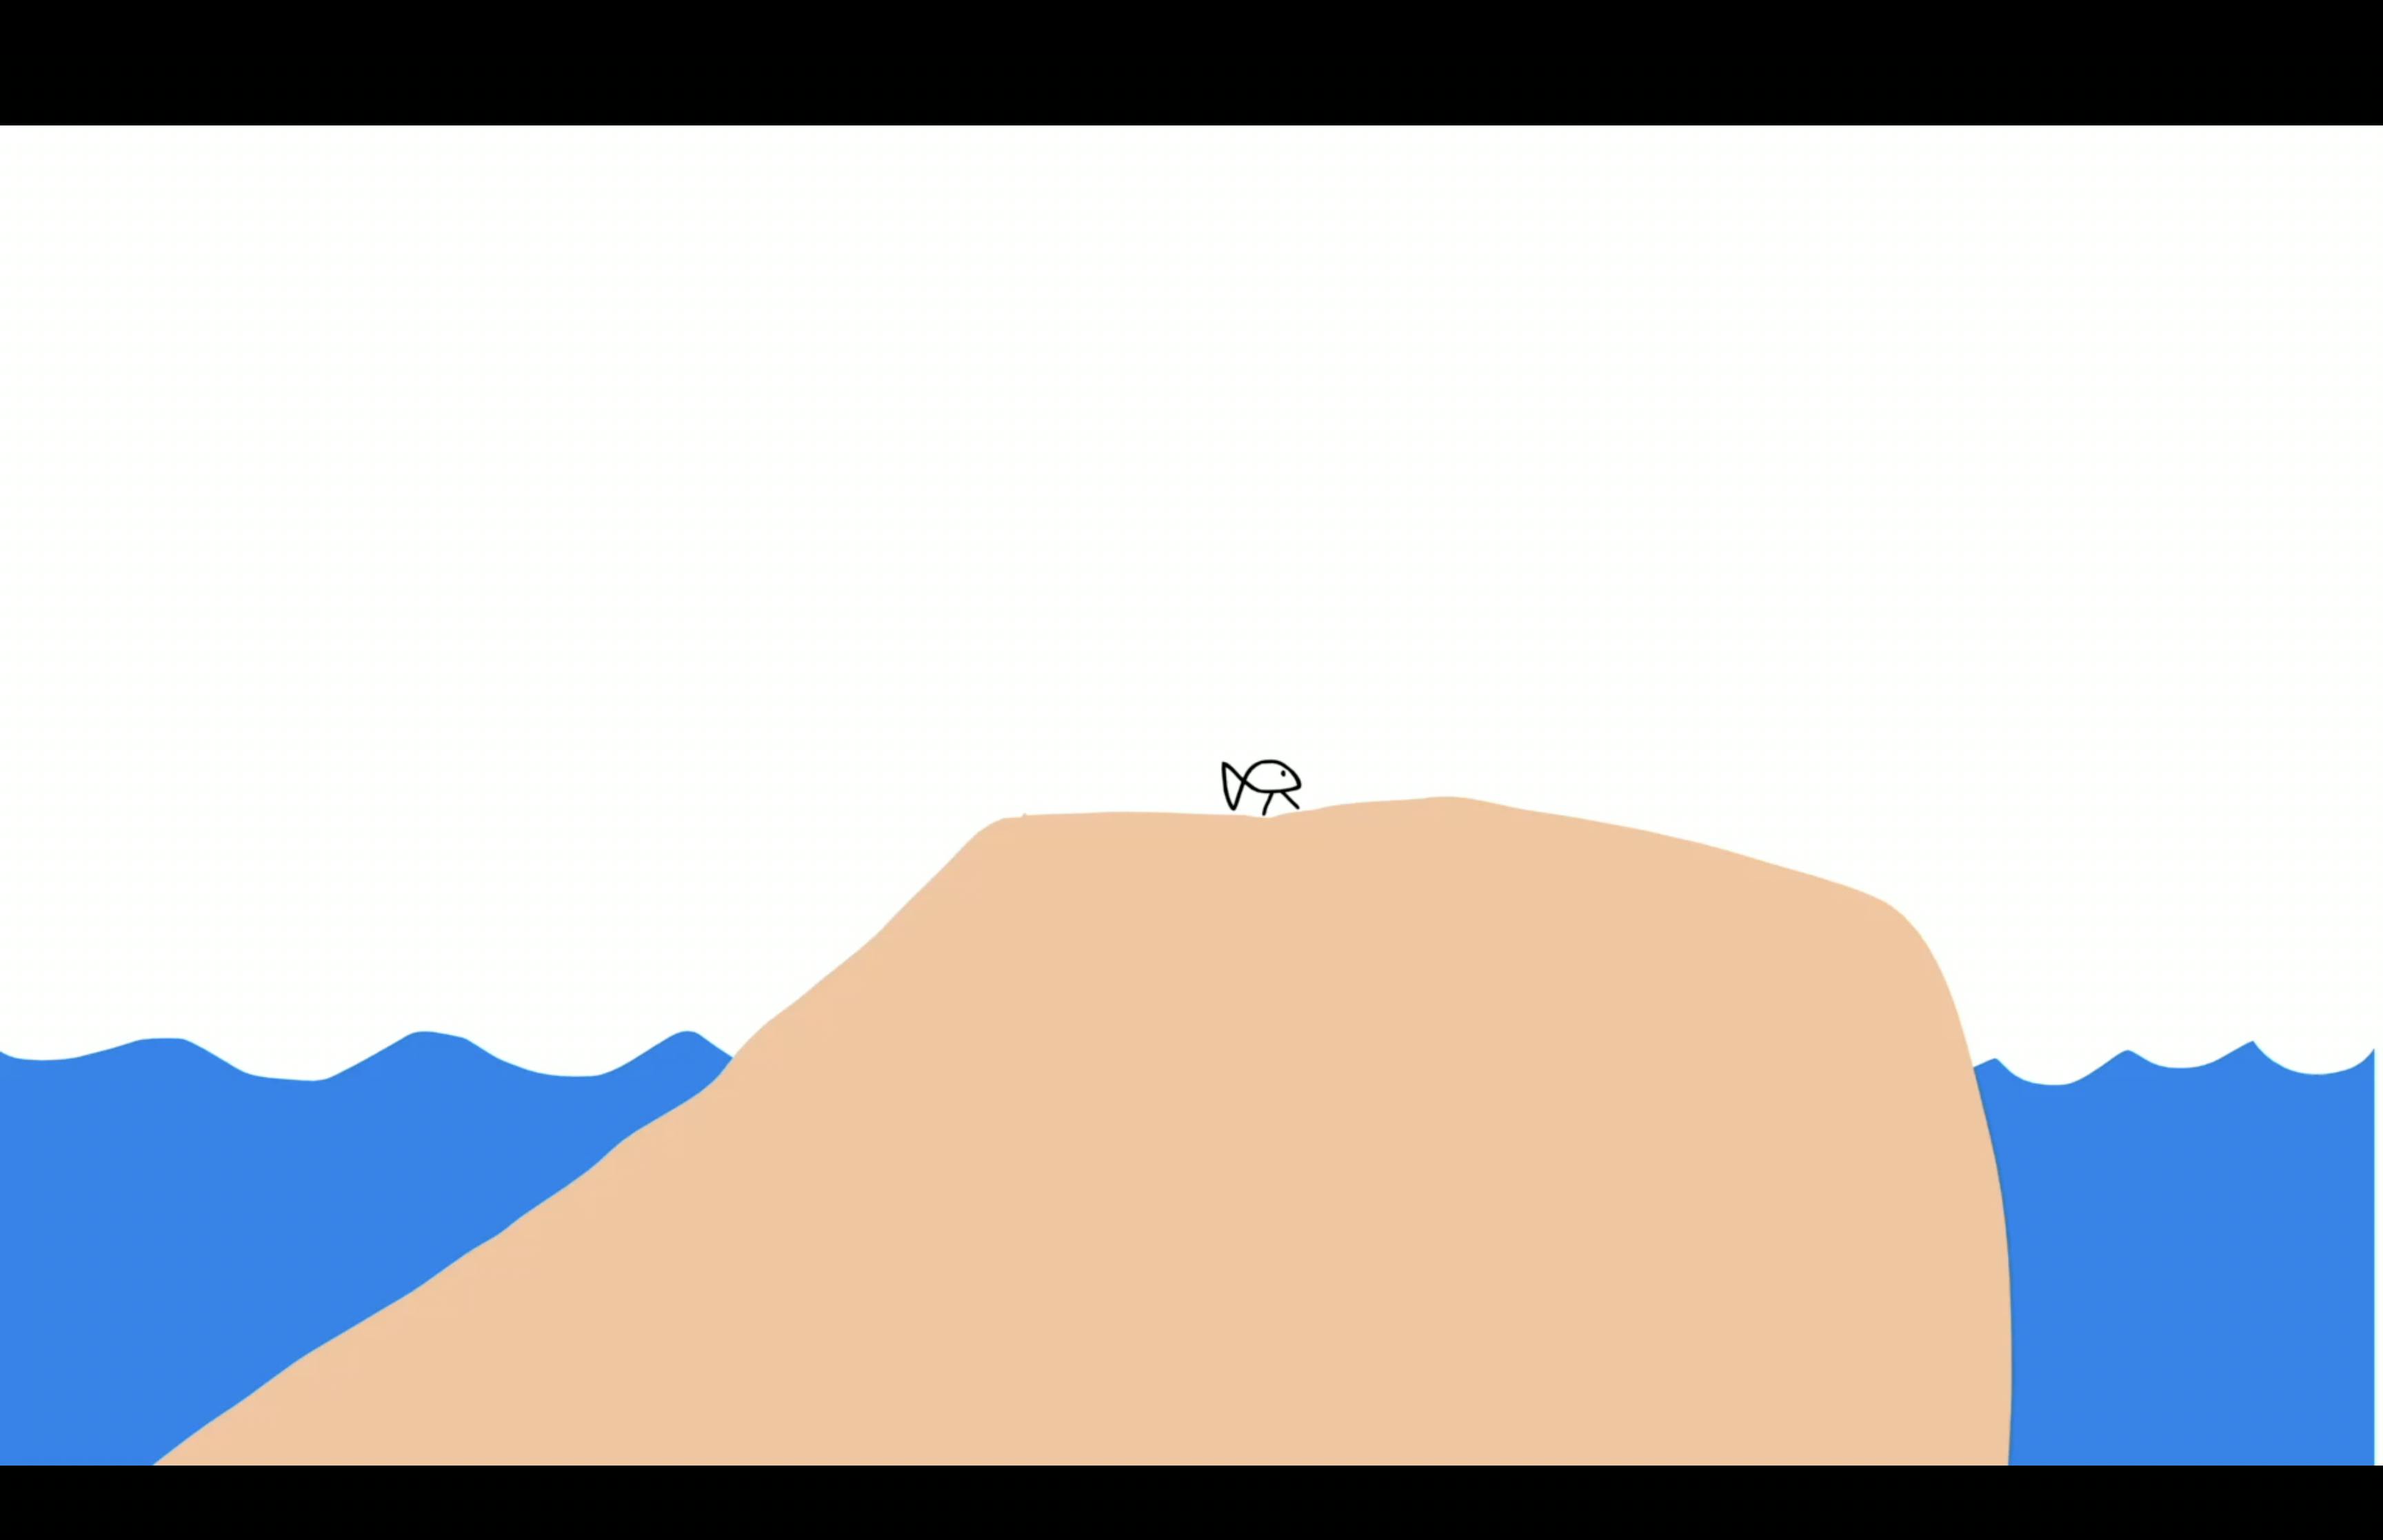 a simple scene with a fish standing on an island with tiny legs